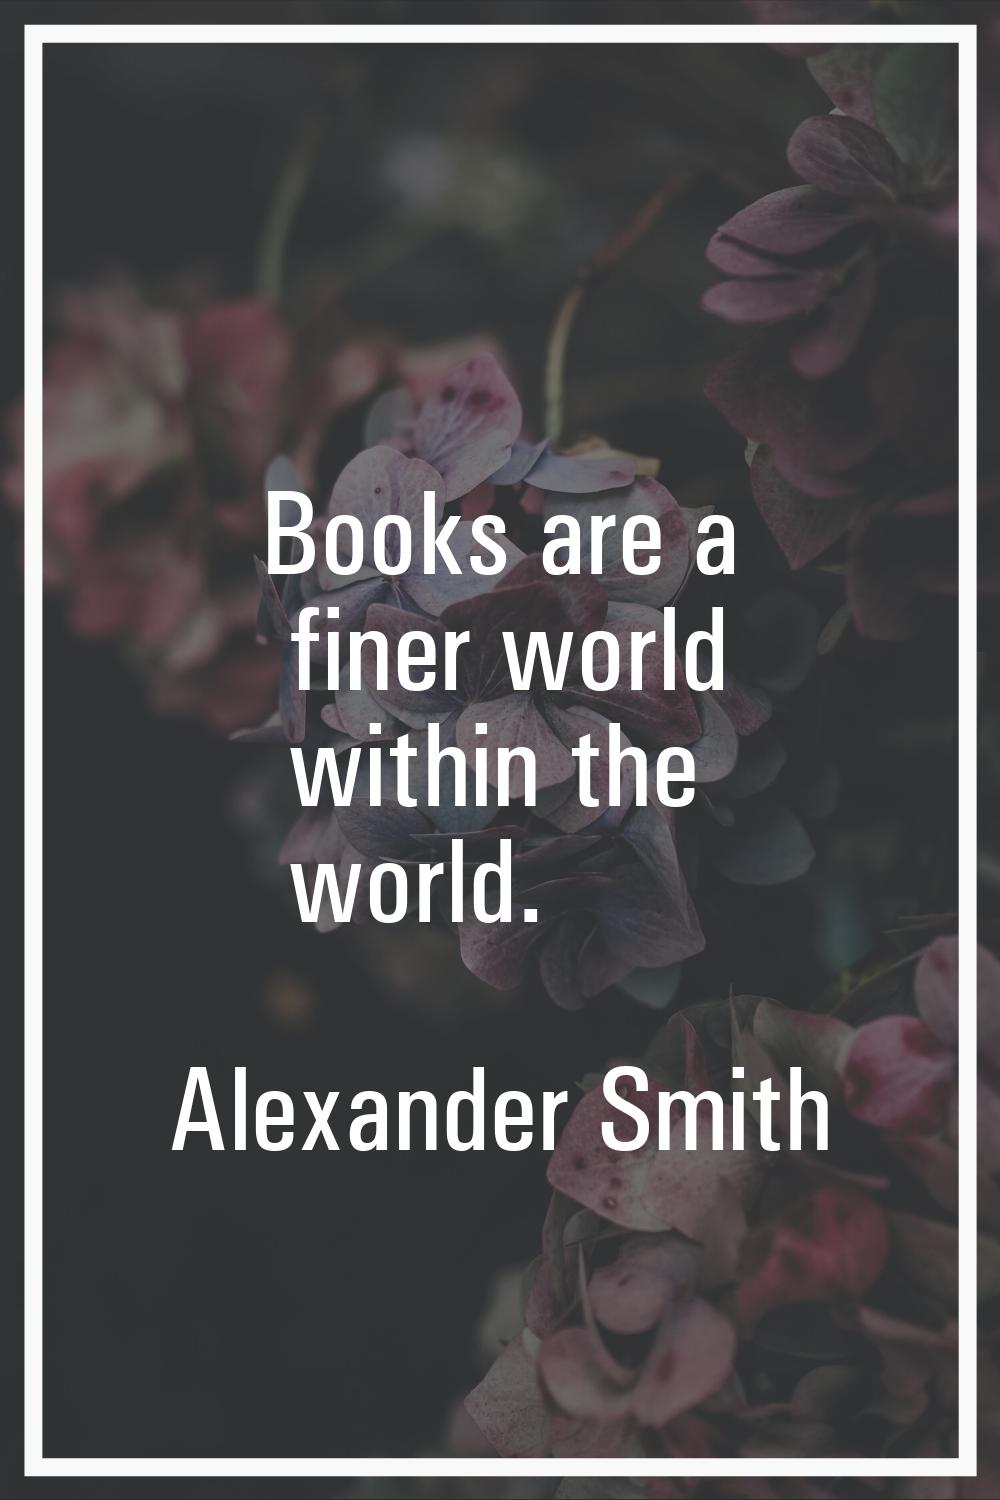 Books are a finer world within the world.